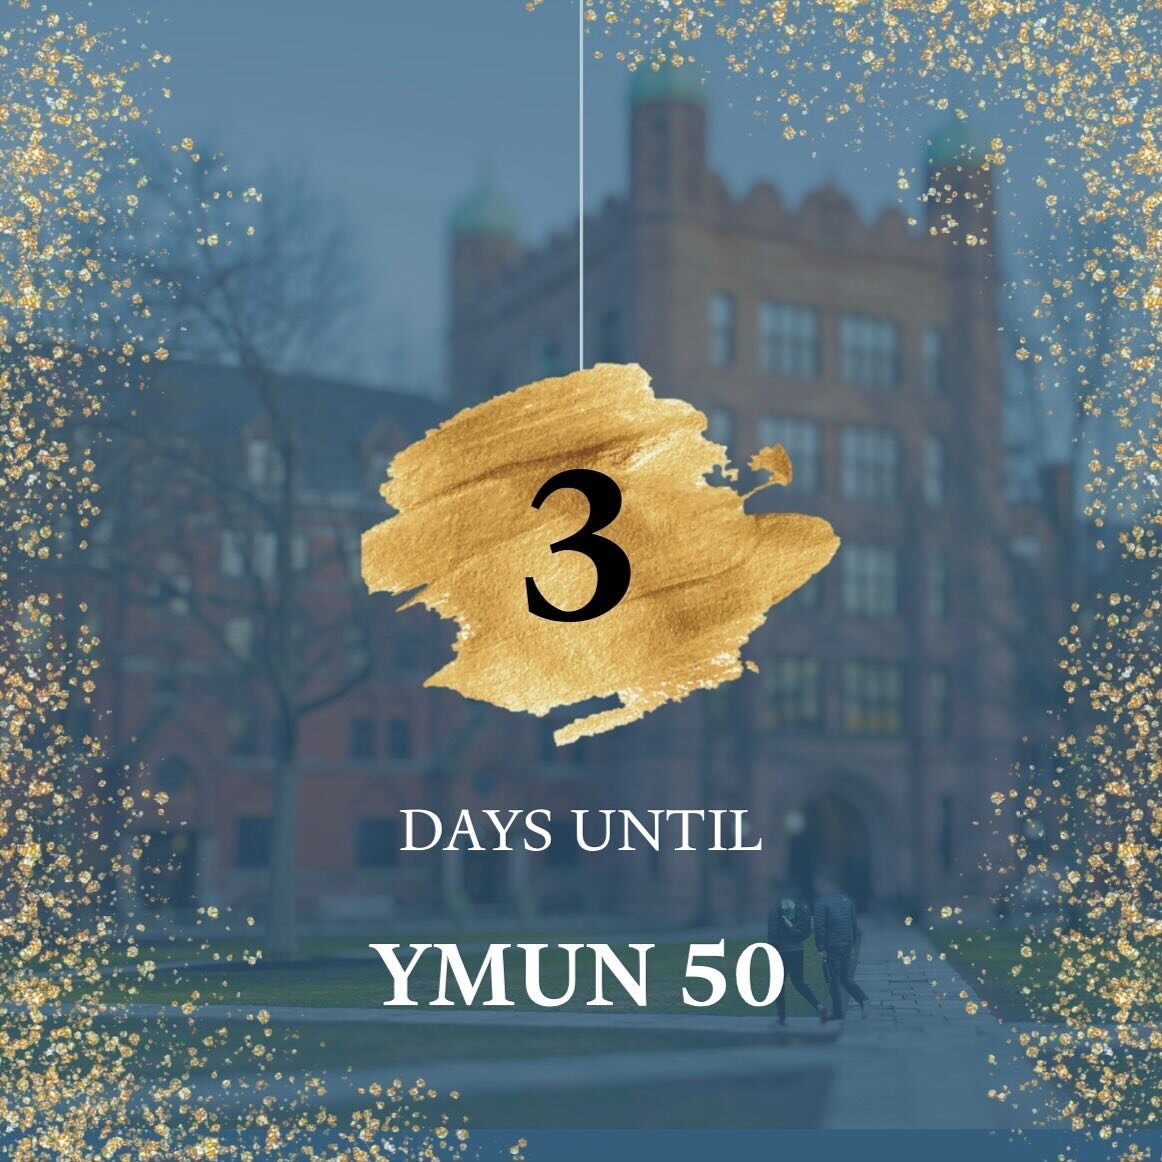 Just 3 more days until YMUN50! We are so excited to welcome all of the delegations to campus for an exhilarating weekend of debate, connection, and cooperation.